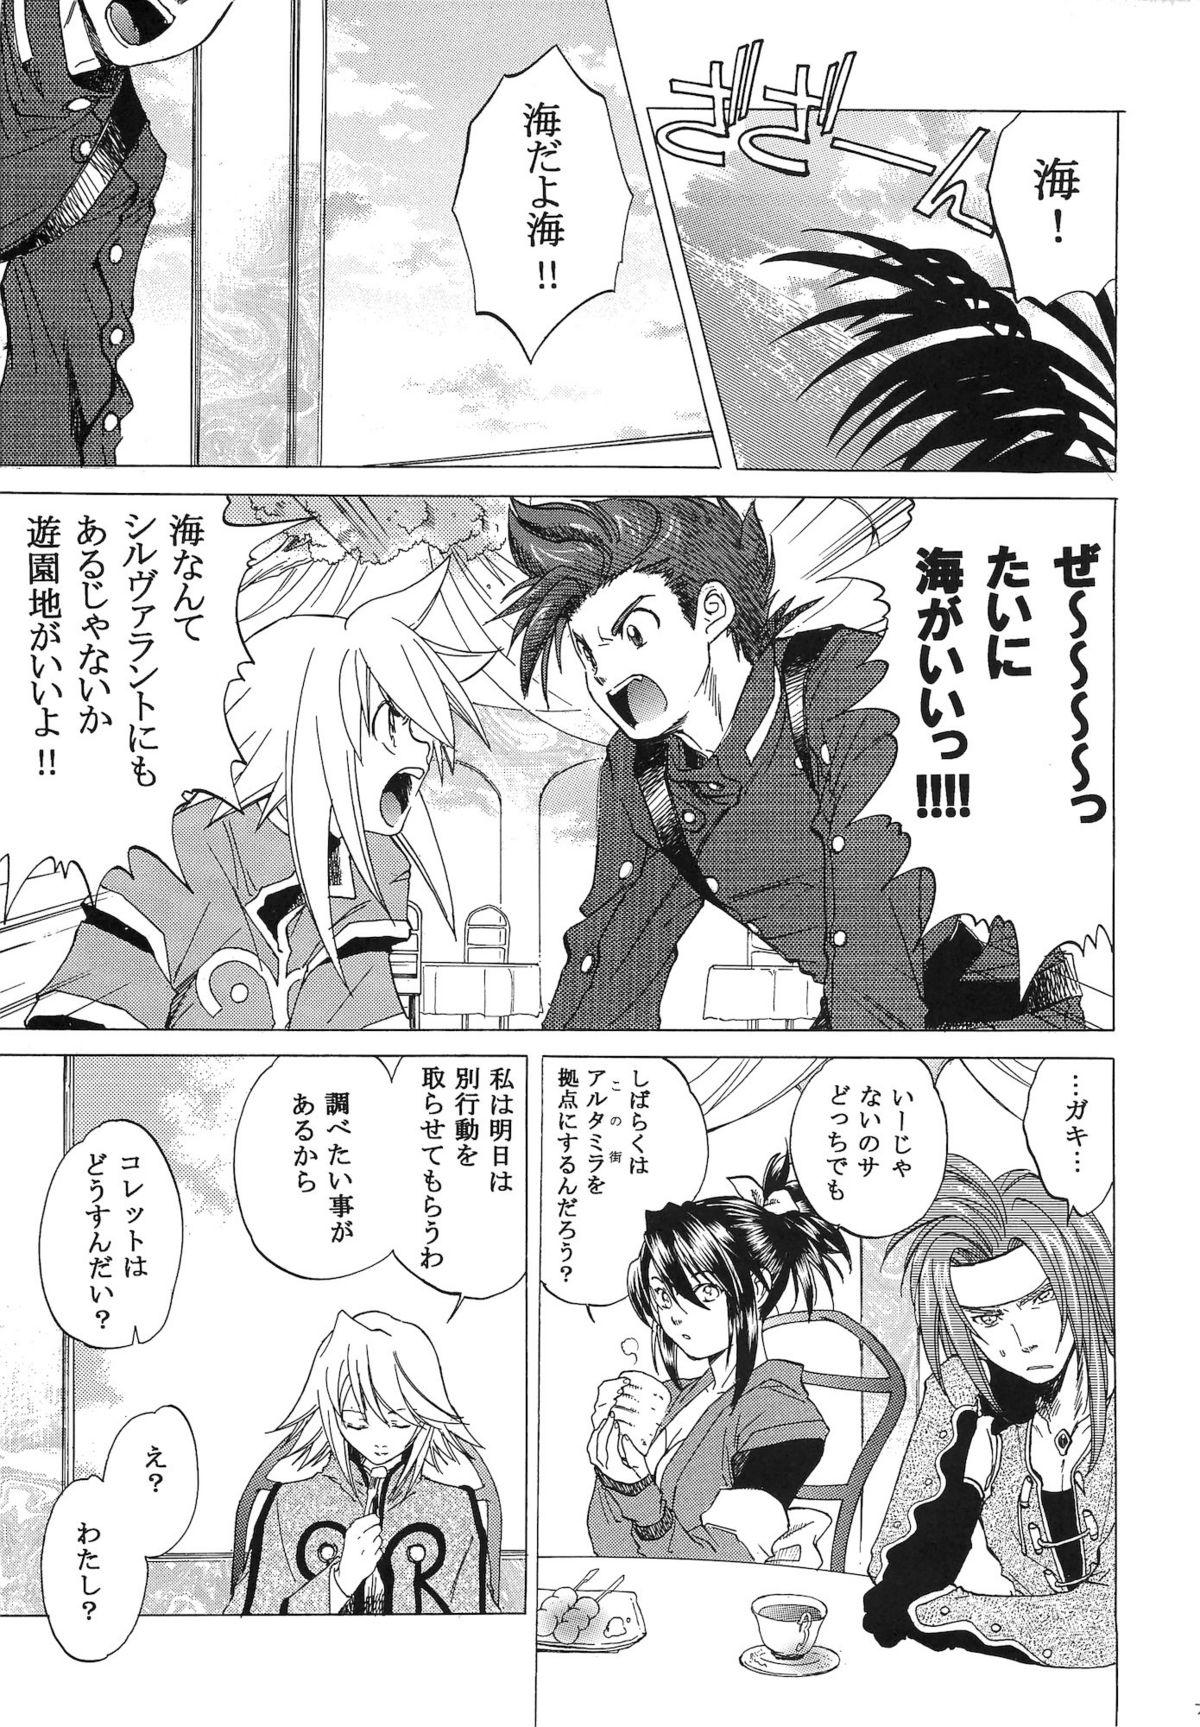 Ass Fucking RPxZS - Tales of symphonia Nasty Porn - Page 6